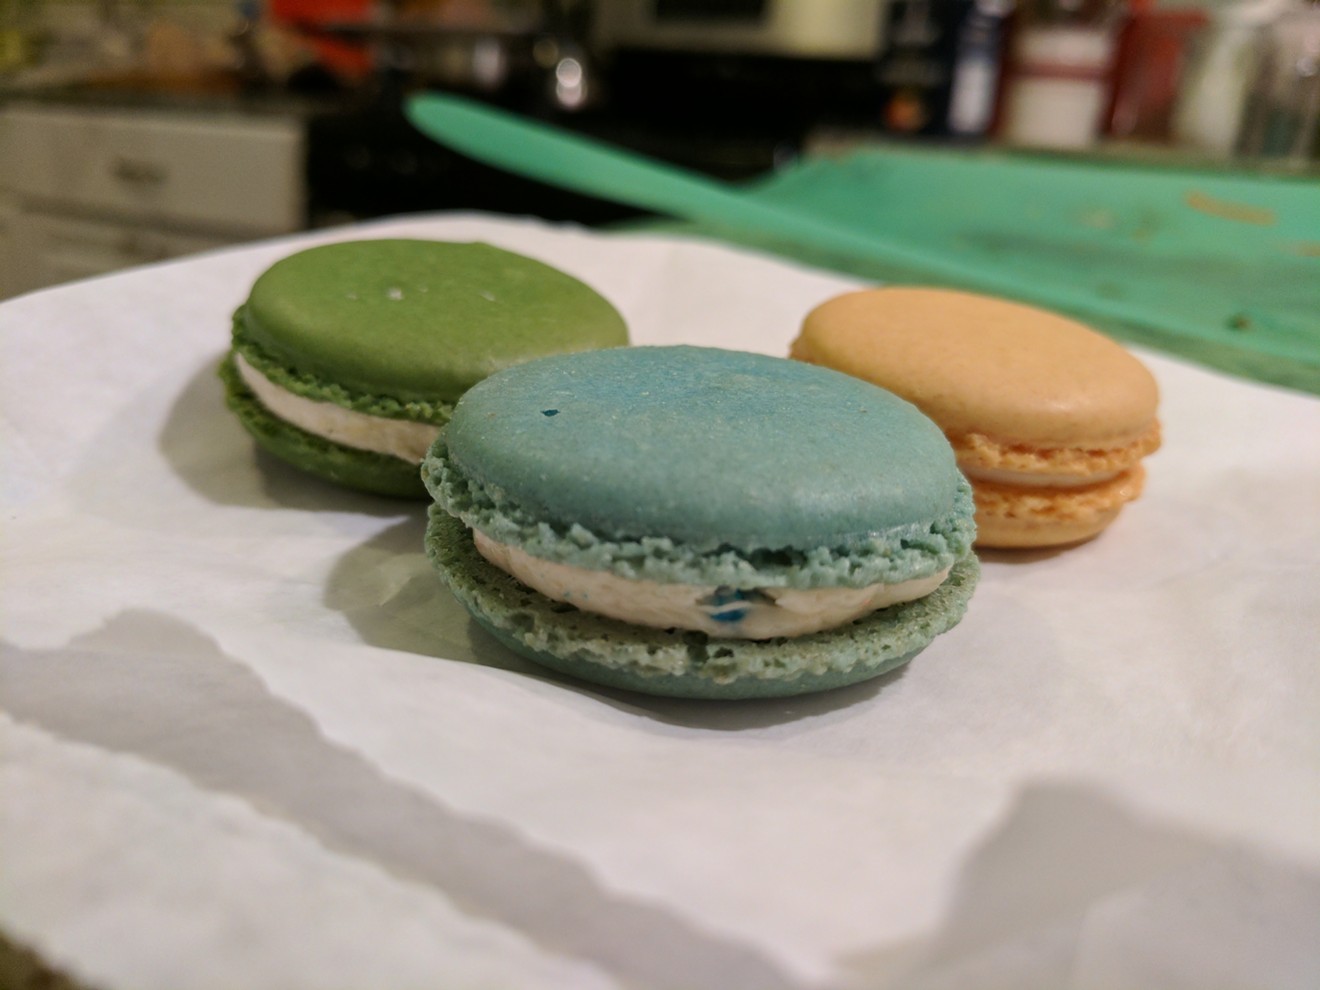 That, front and center, is the Fruity Pebbles flavor from Chelles Macarons. The backup dancers are pistachio and lemon.